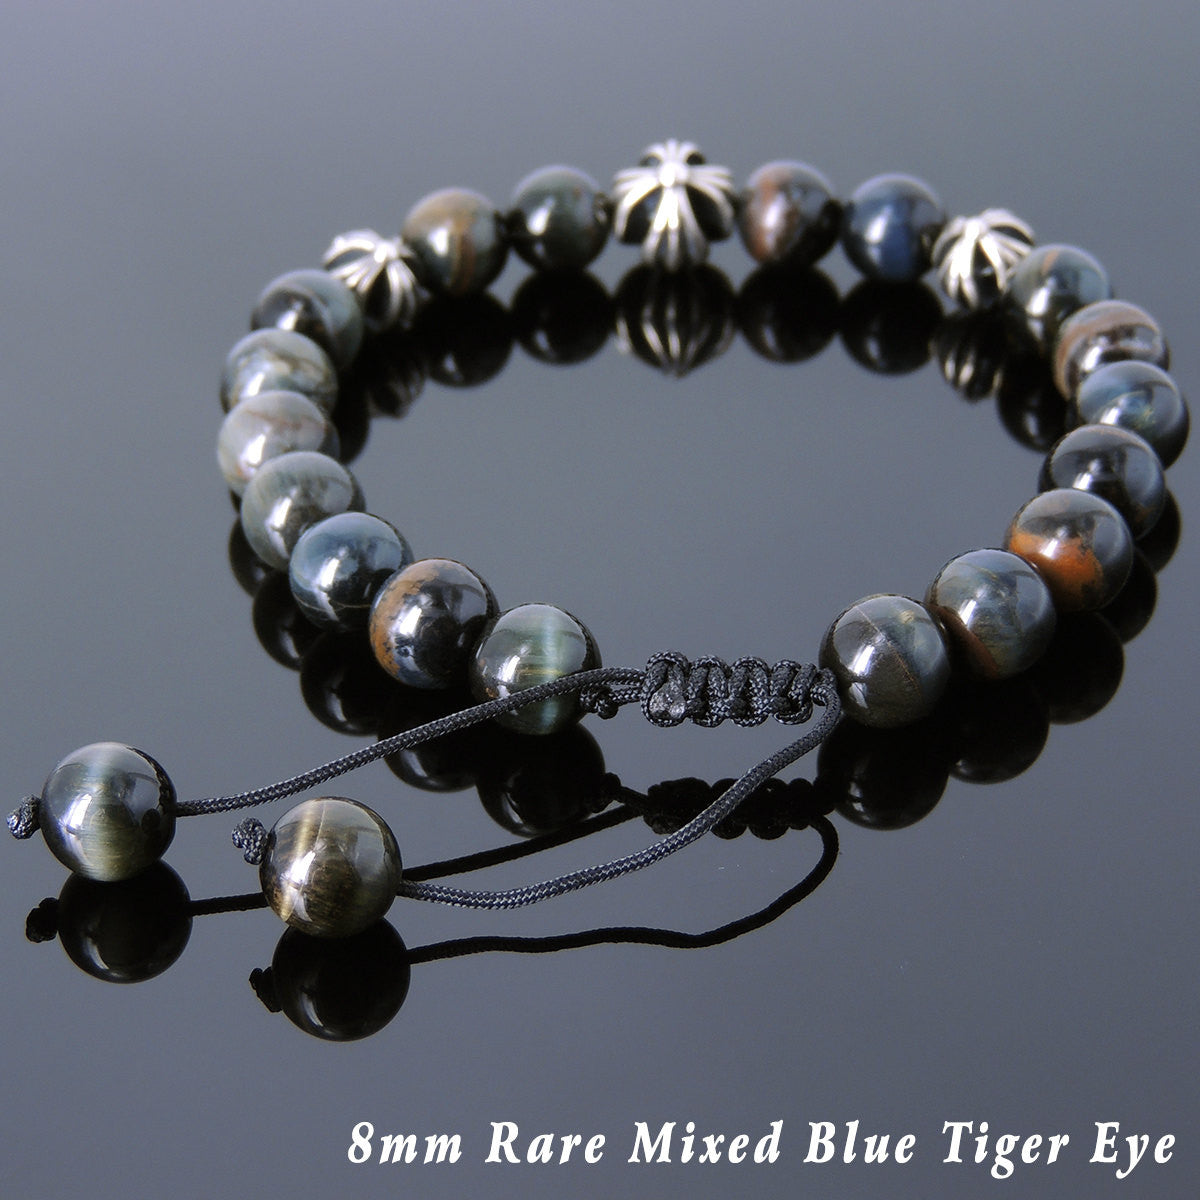 Rare Mixed Blue Tiger Eye Adjustable Braided Gemstone Bracelet with S925 Sterling Silver Holy Trinity Cross Beads - Handmade by Gem & Silver BR840